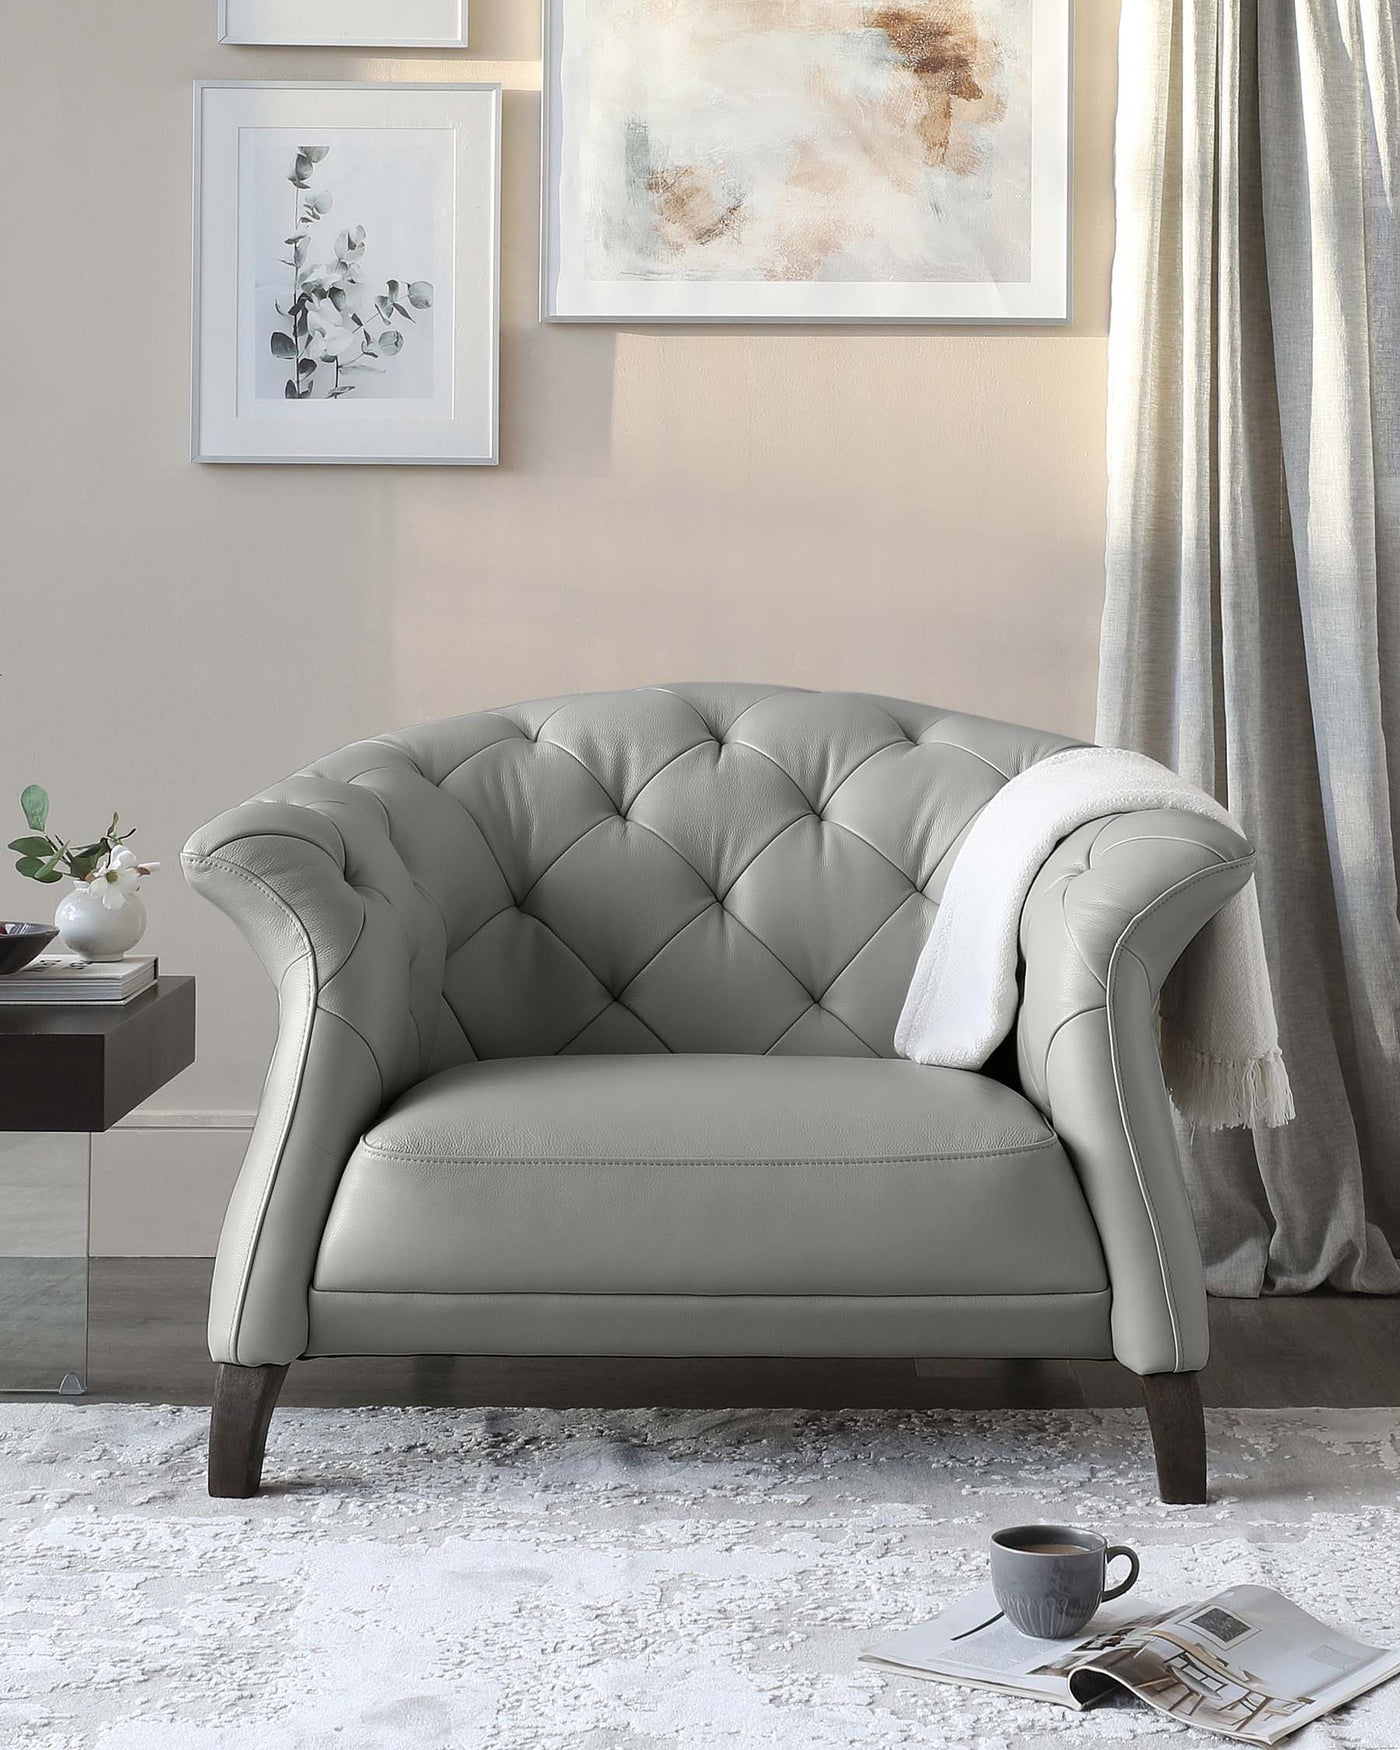 Elegant grey tufted loveseat with a plush, curved back, dark wooden legs, and a soft white throw blanket on one armrest, set in a stylishly decorated room.